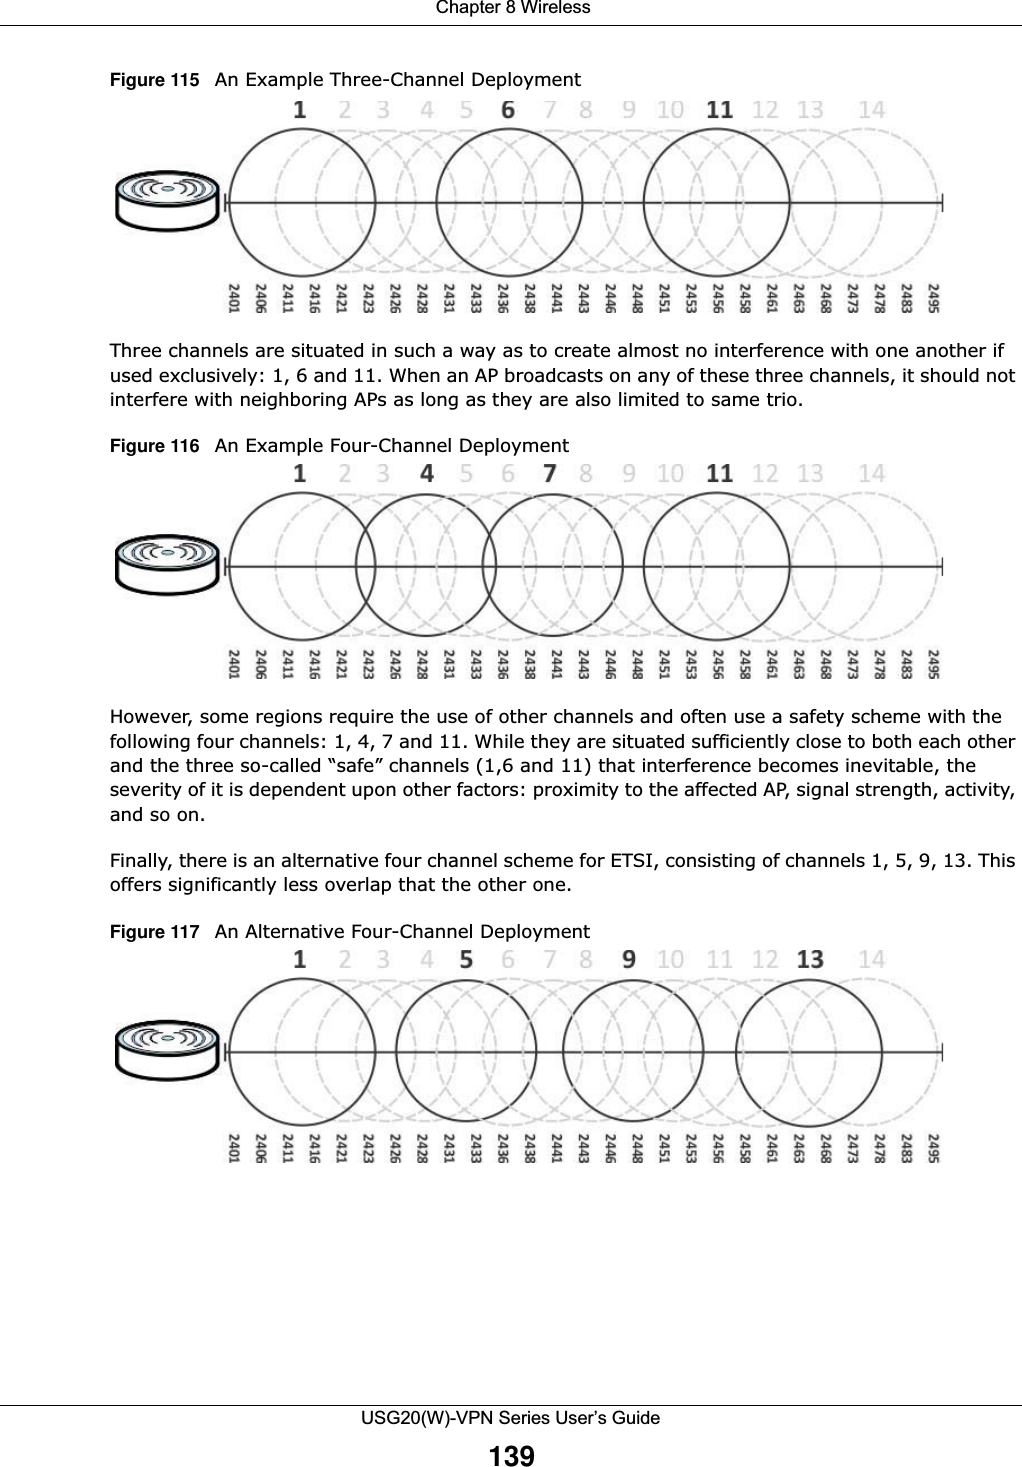  Chapter 8 WirelessUSG20(W)-VPN Series User’s Guide139Figure 115   An Example Three-Channel DeploymentThree channels are situated in such a way as to create almost no interference with one another if used exclusively: 1, 6 and 11. When an AP broadcasts on any of these three channels, it should not interfere with neighboring APs as long as they are also limited to same trio.Figure 116   An Example Four-Channel DeploymentHowever, some regions require the use of other channels and often use a safety scheme with the following four channels: 1, 4, 7 and 11. While they are situated sufficiently close to both each other and the three so-called “safe” channels (1,6 and 11) that interference becomes inevitable, the severity of it is dependent upon other factors: proximity to the affected AP, signal strength, activity, and so on.Finally, there is an alternative four channel scheme for ETSI, consisting of channels 1, 5, 9, 13. This offers significantly less overlap that the other one.Figure 117   An Alternative Four-Channel Deployment